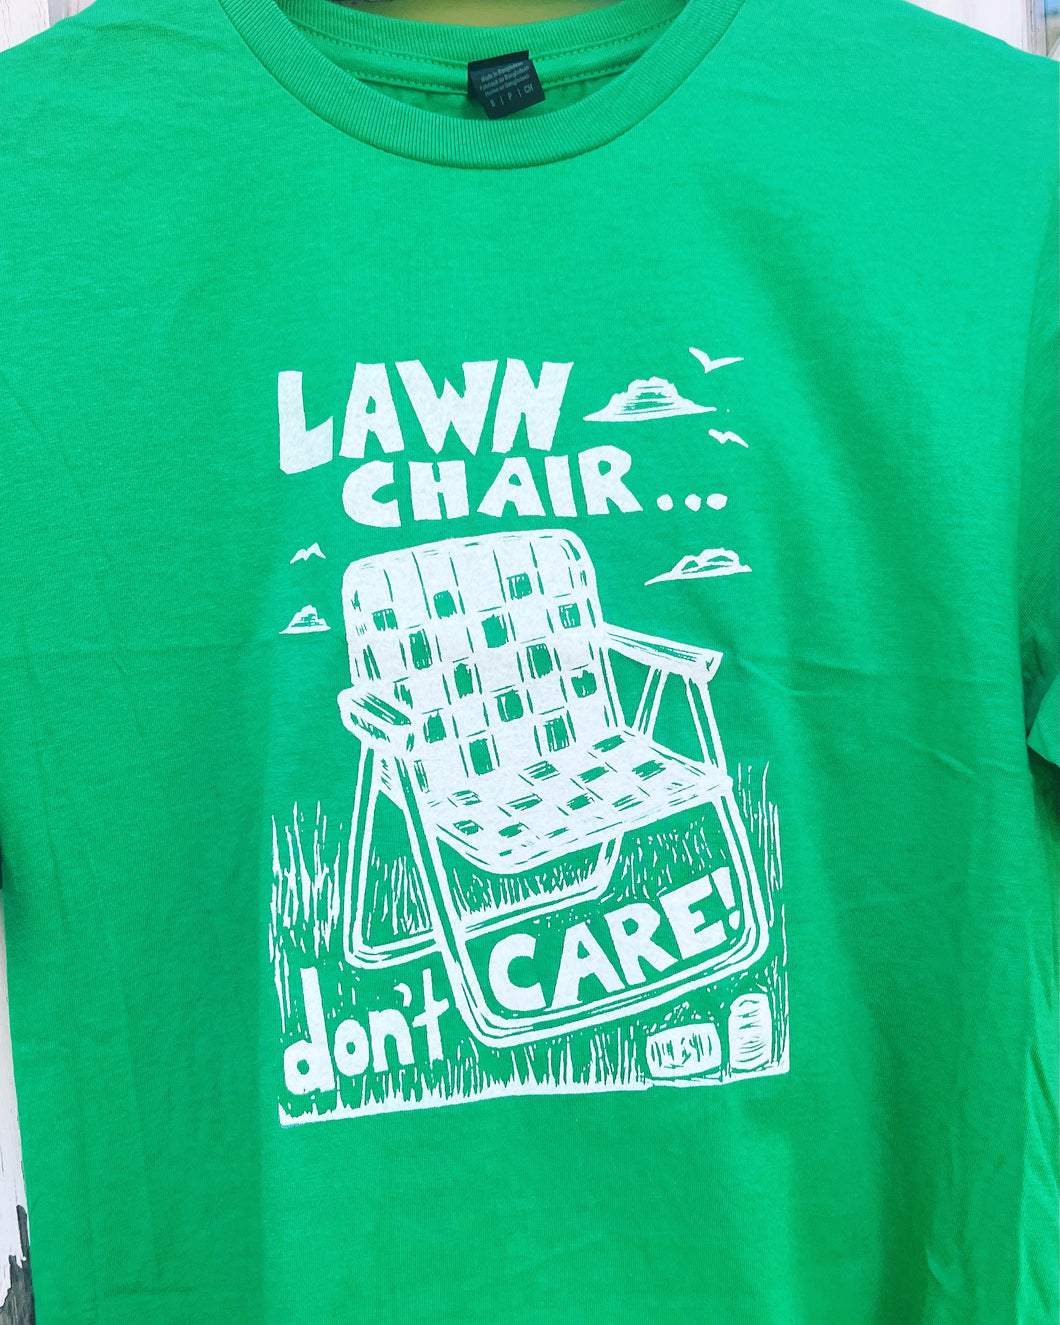 Lawn Chair Don’t Care Tshirt, by Pixel Palmer